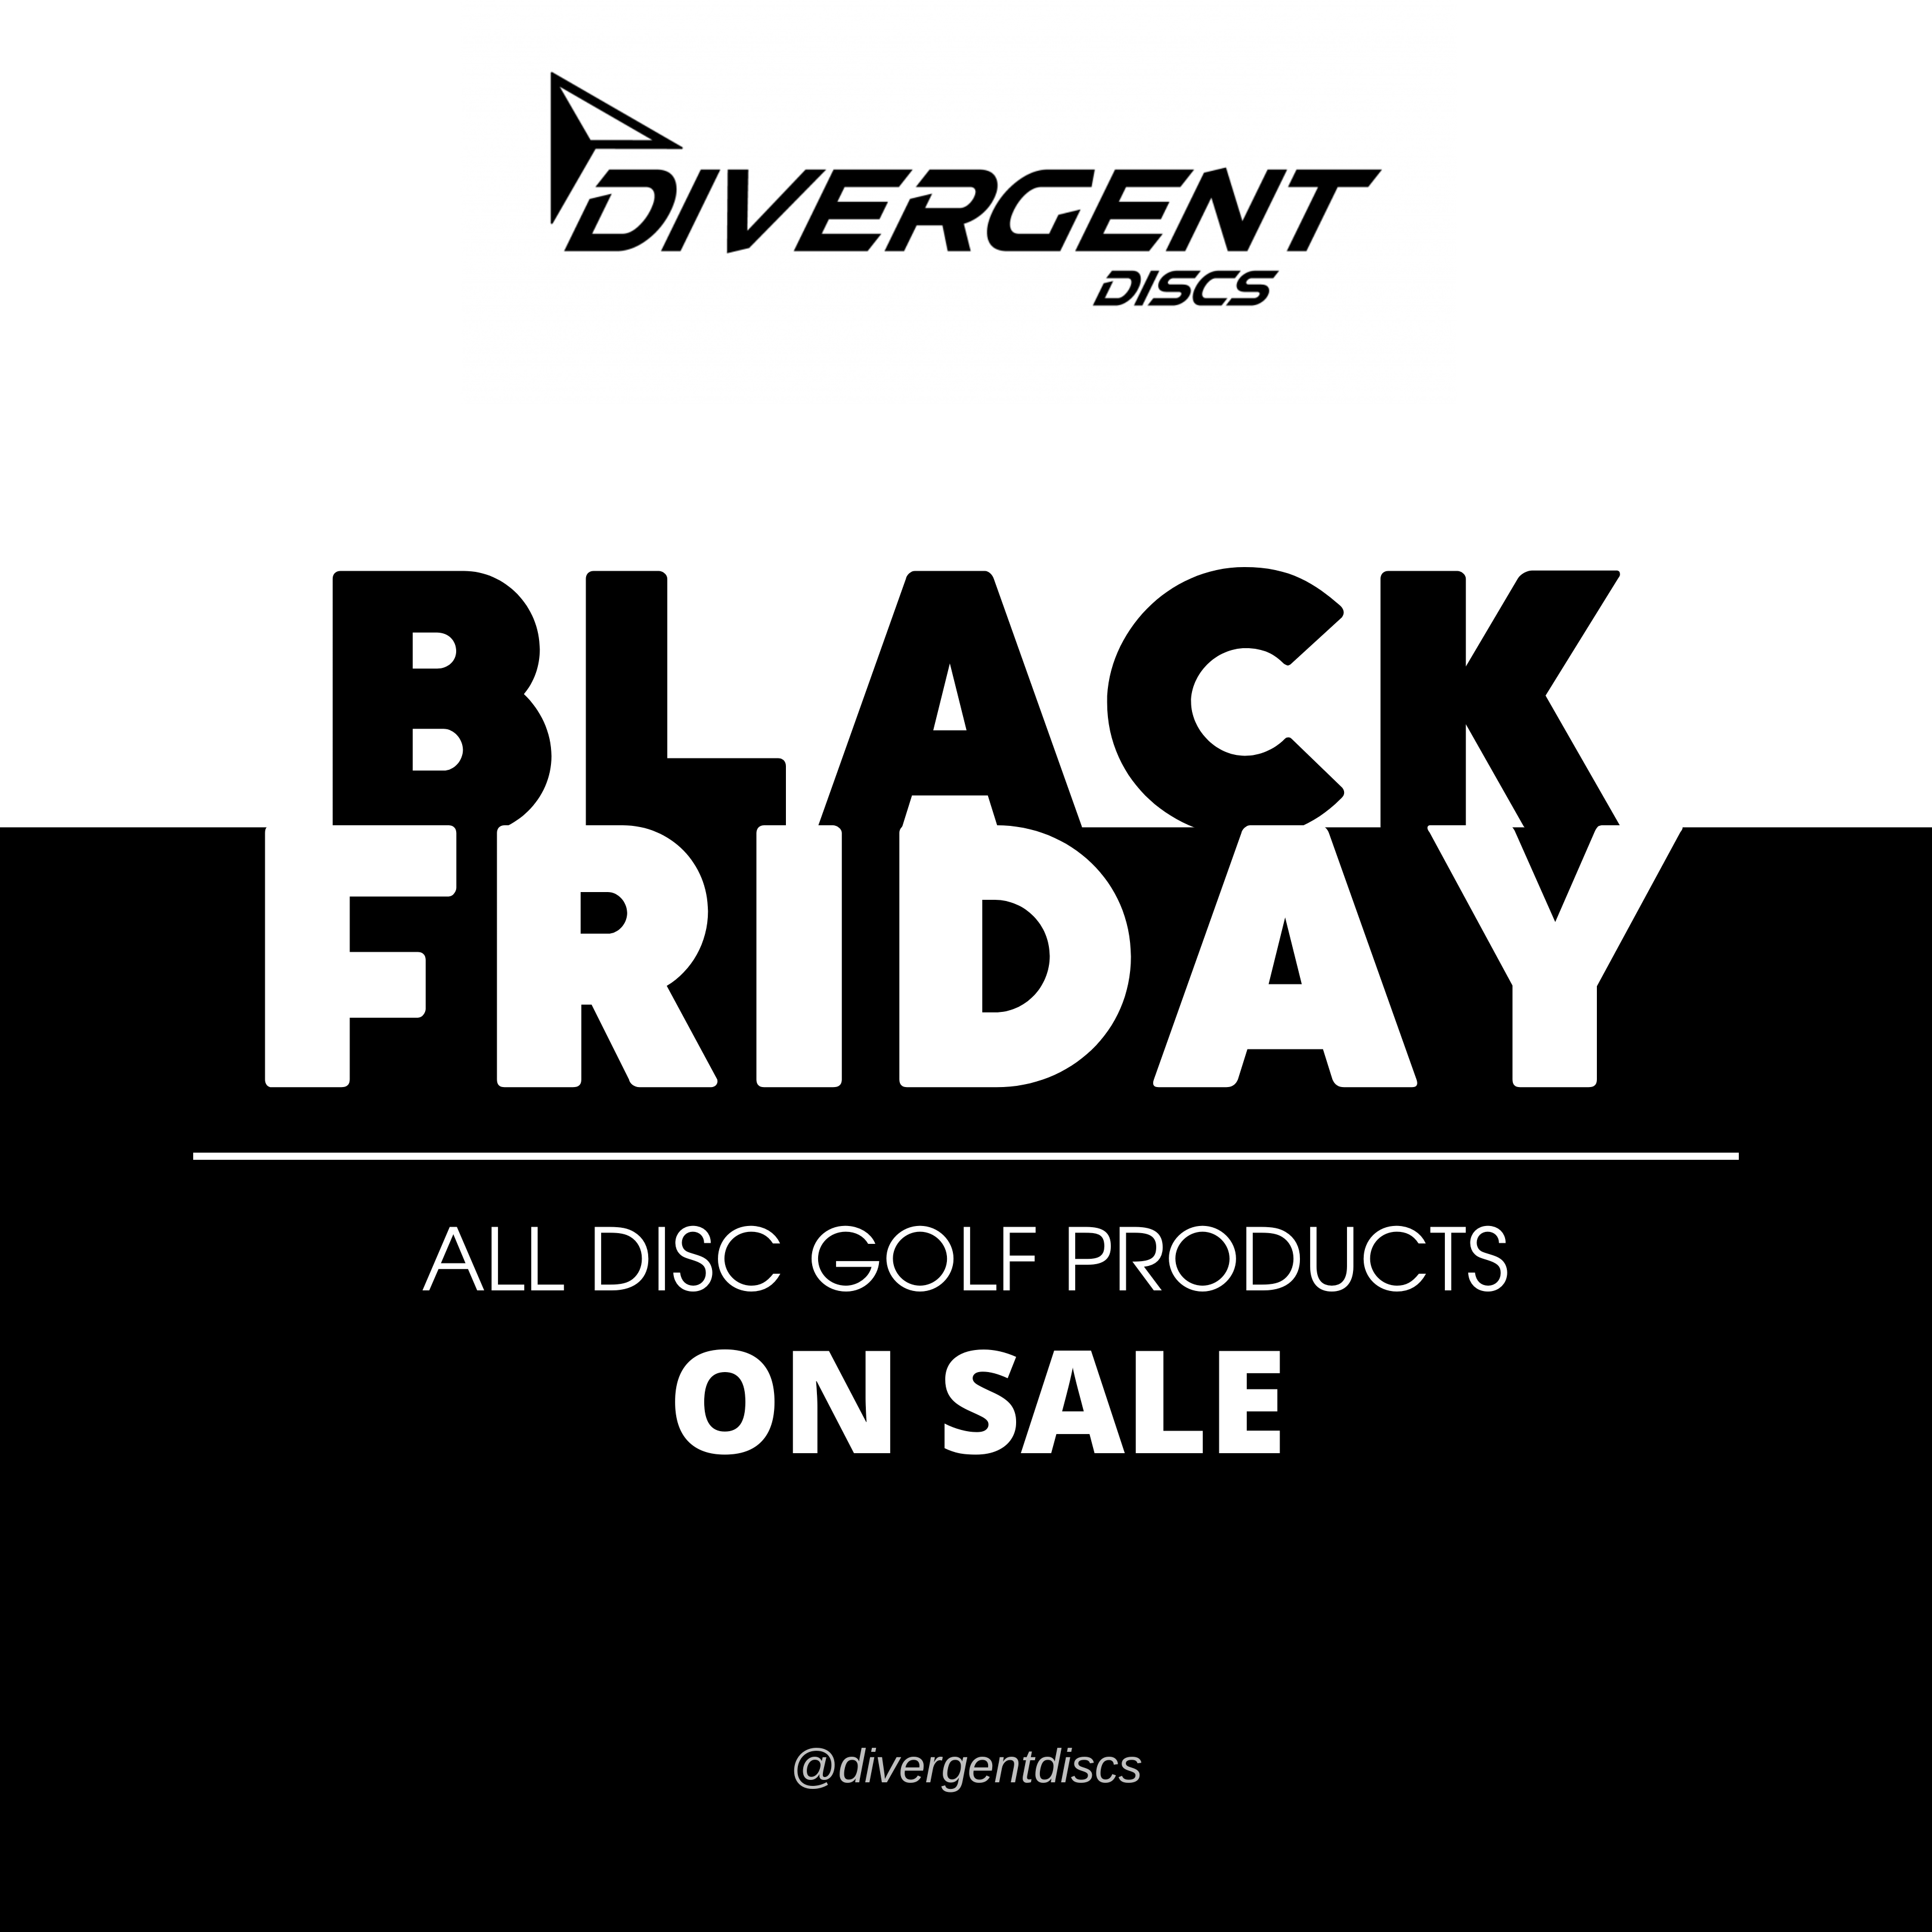 Black Friday Deals – All Disc Golf Products on Sale!